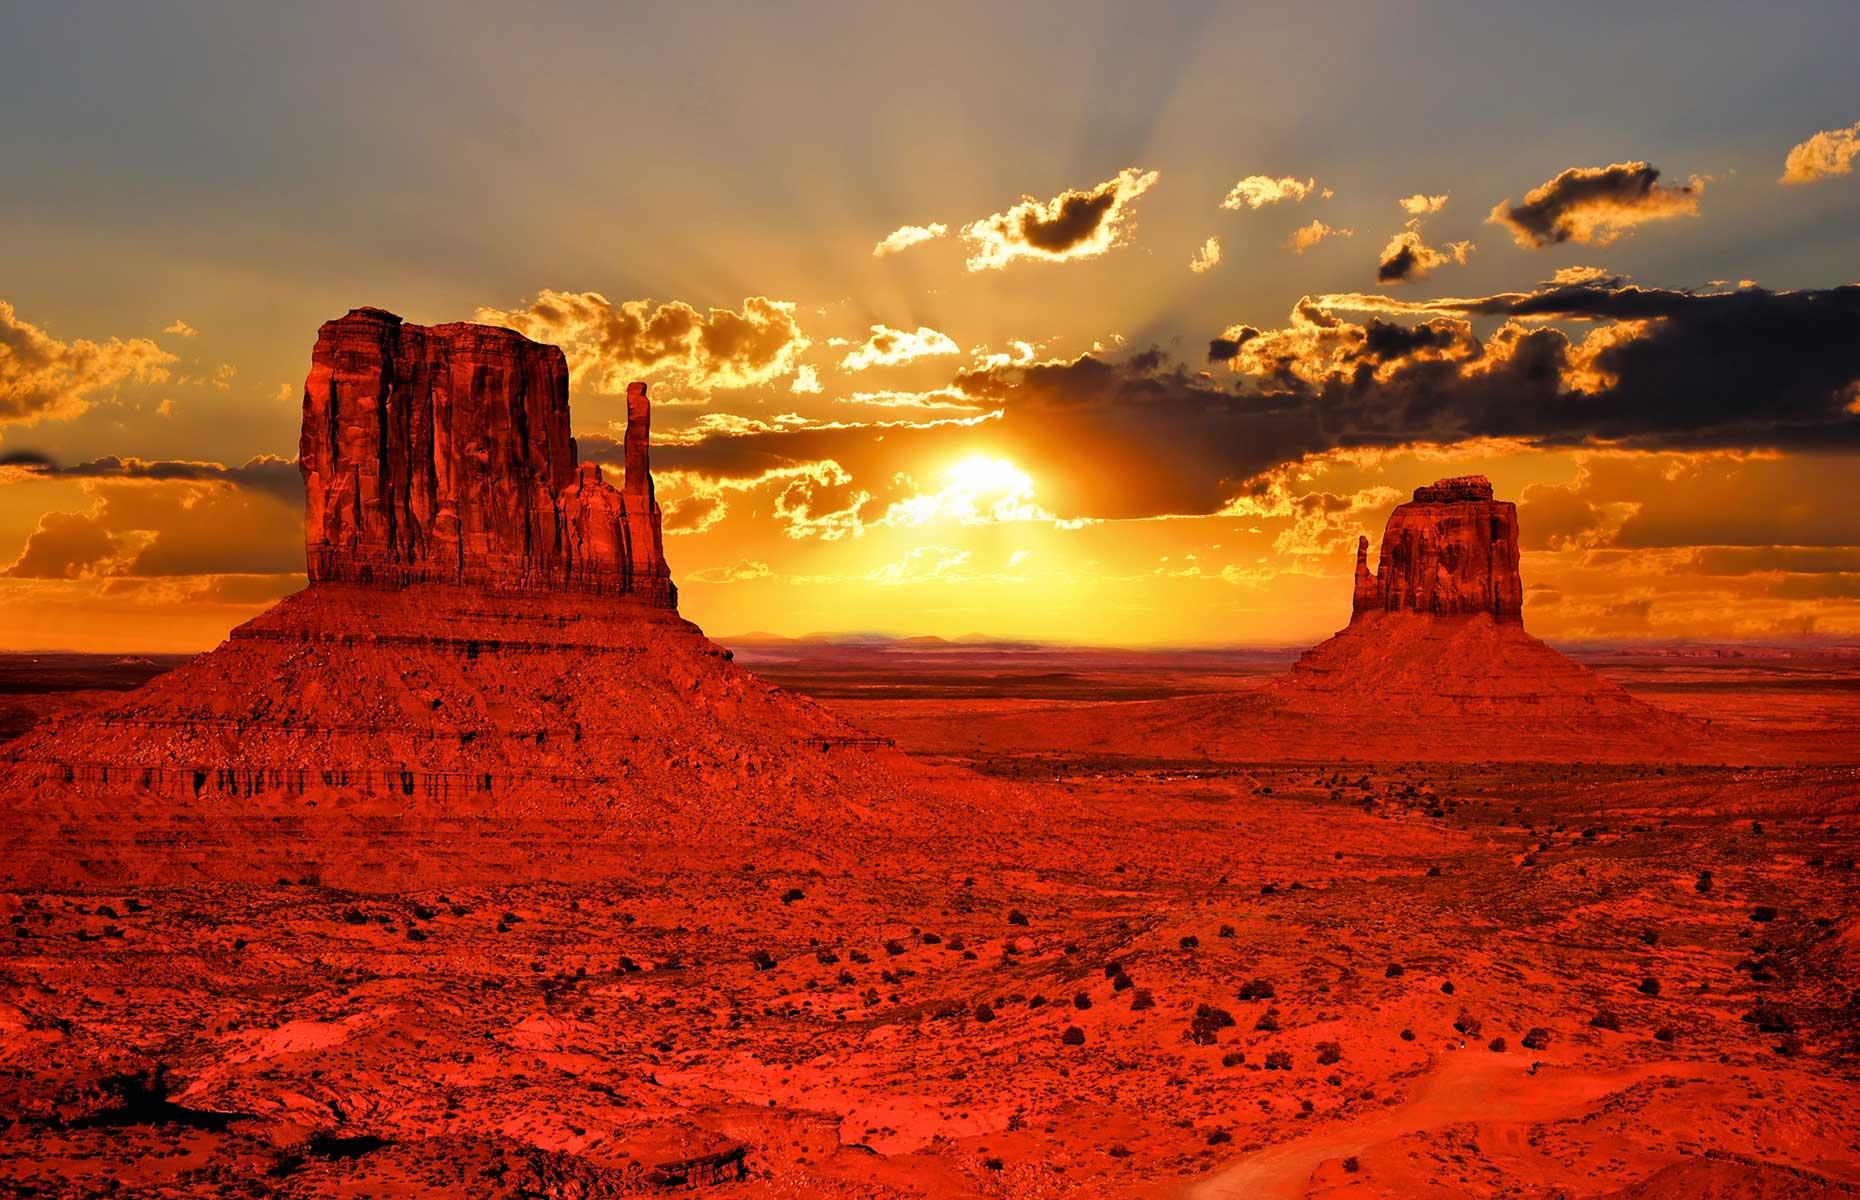 <p>Lying on the Arizona-Utah border, Monument Valley's been the backdrop to many Western movies such as <em>Stagecoach</em> and <em>The Lone Ranger</em>. But it's best seen in real life at sunrise, when bathed in warm light, highlighting the red-sand desert. Usually you can enjoy a self-drive loop around the most beautiful spots, which takes around three hours but the park is currently closed so <a href="https://navajonationparks.org/tribal-parks/monument-valley/">do check for opening times</a>. </p>